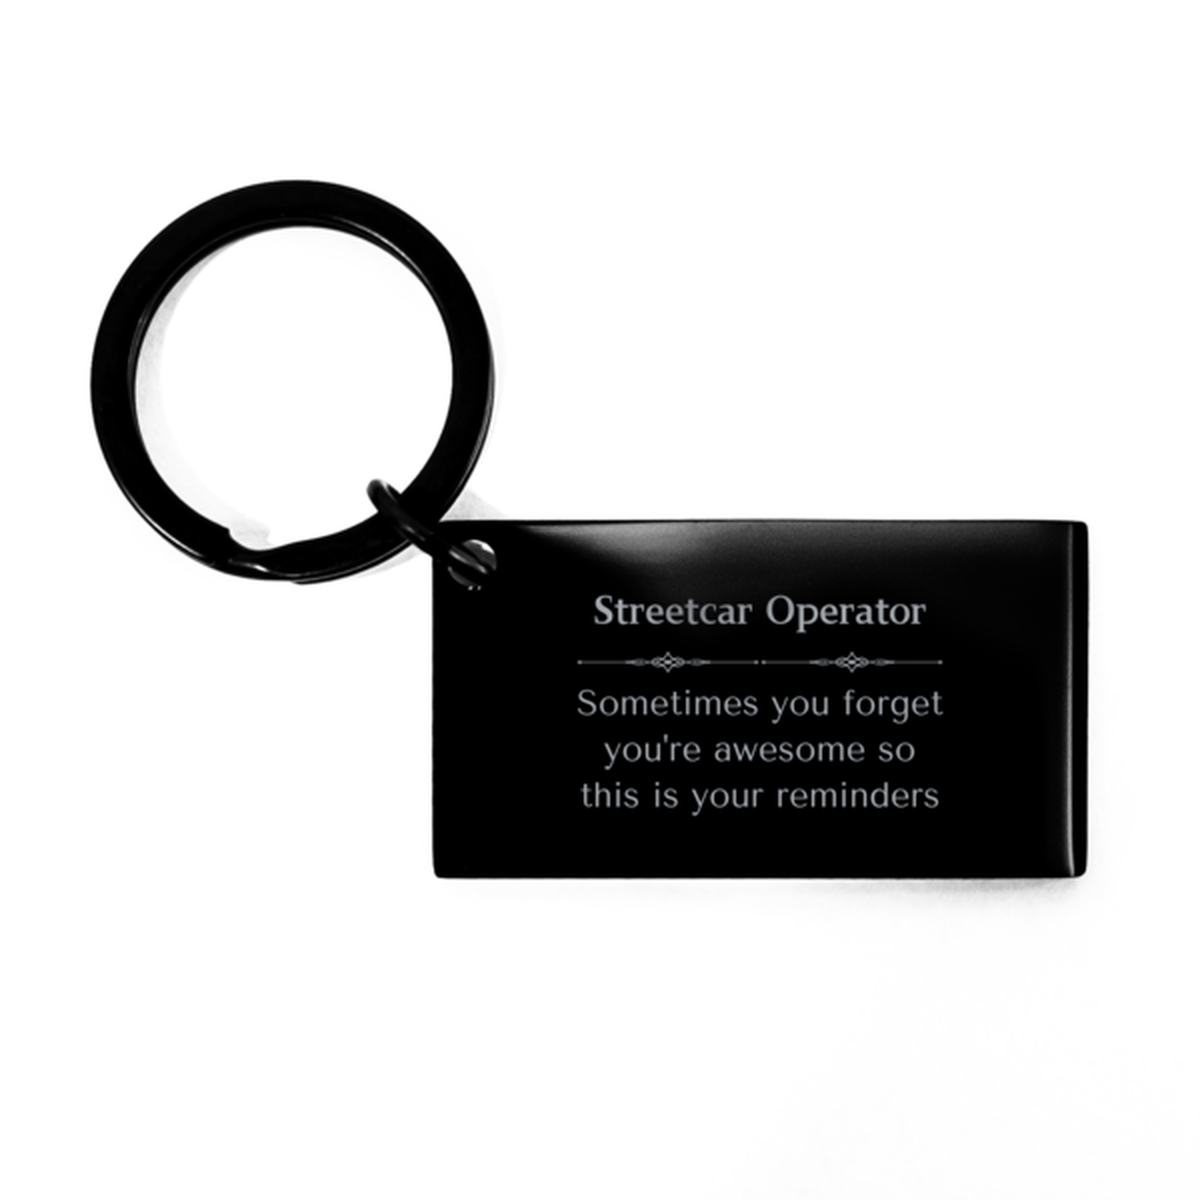 Sentimental Streetcar Operator Keychain, Warden Sometimes you forget you're awesome so this is your reminders, Graduation Christmas Birthday Gifts for Streetcar Operator, Men, Women, Coworkers